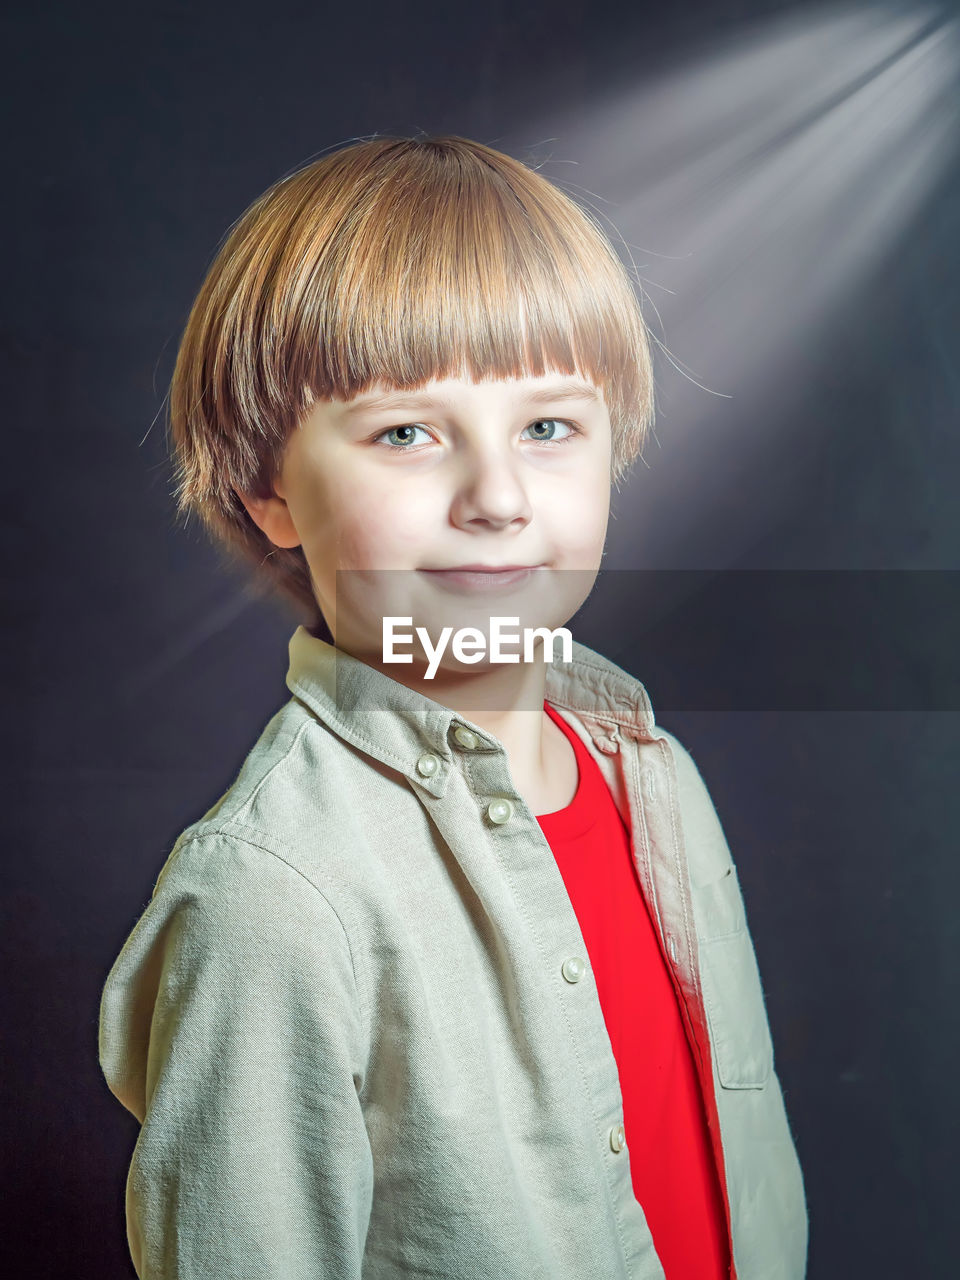 portrait, one person, childhood, child, looking at camera, studio shot, blond hair, smiling, indoors, bangs, clothing, men, emotion, happiness, cute, innocence, standing, waist up, hairstyle, person, portrait photography, gray background, human hair, gray, human face, casual clothing, headshot, front view, female, toddler